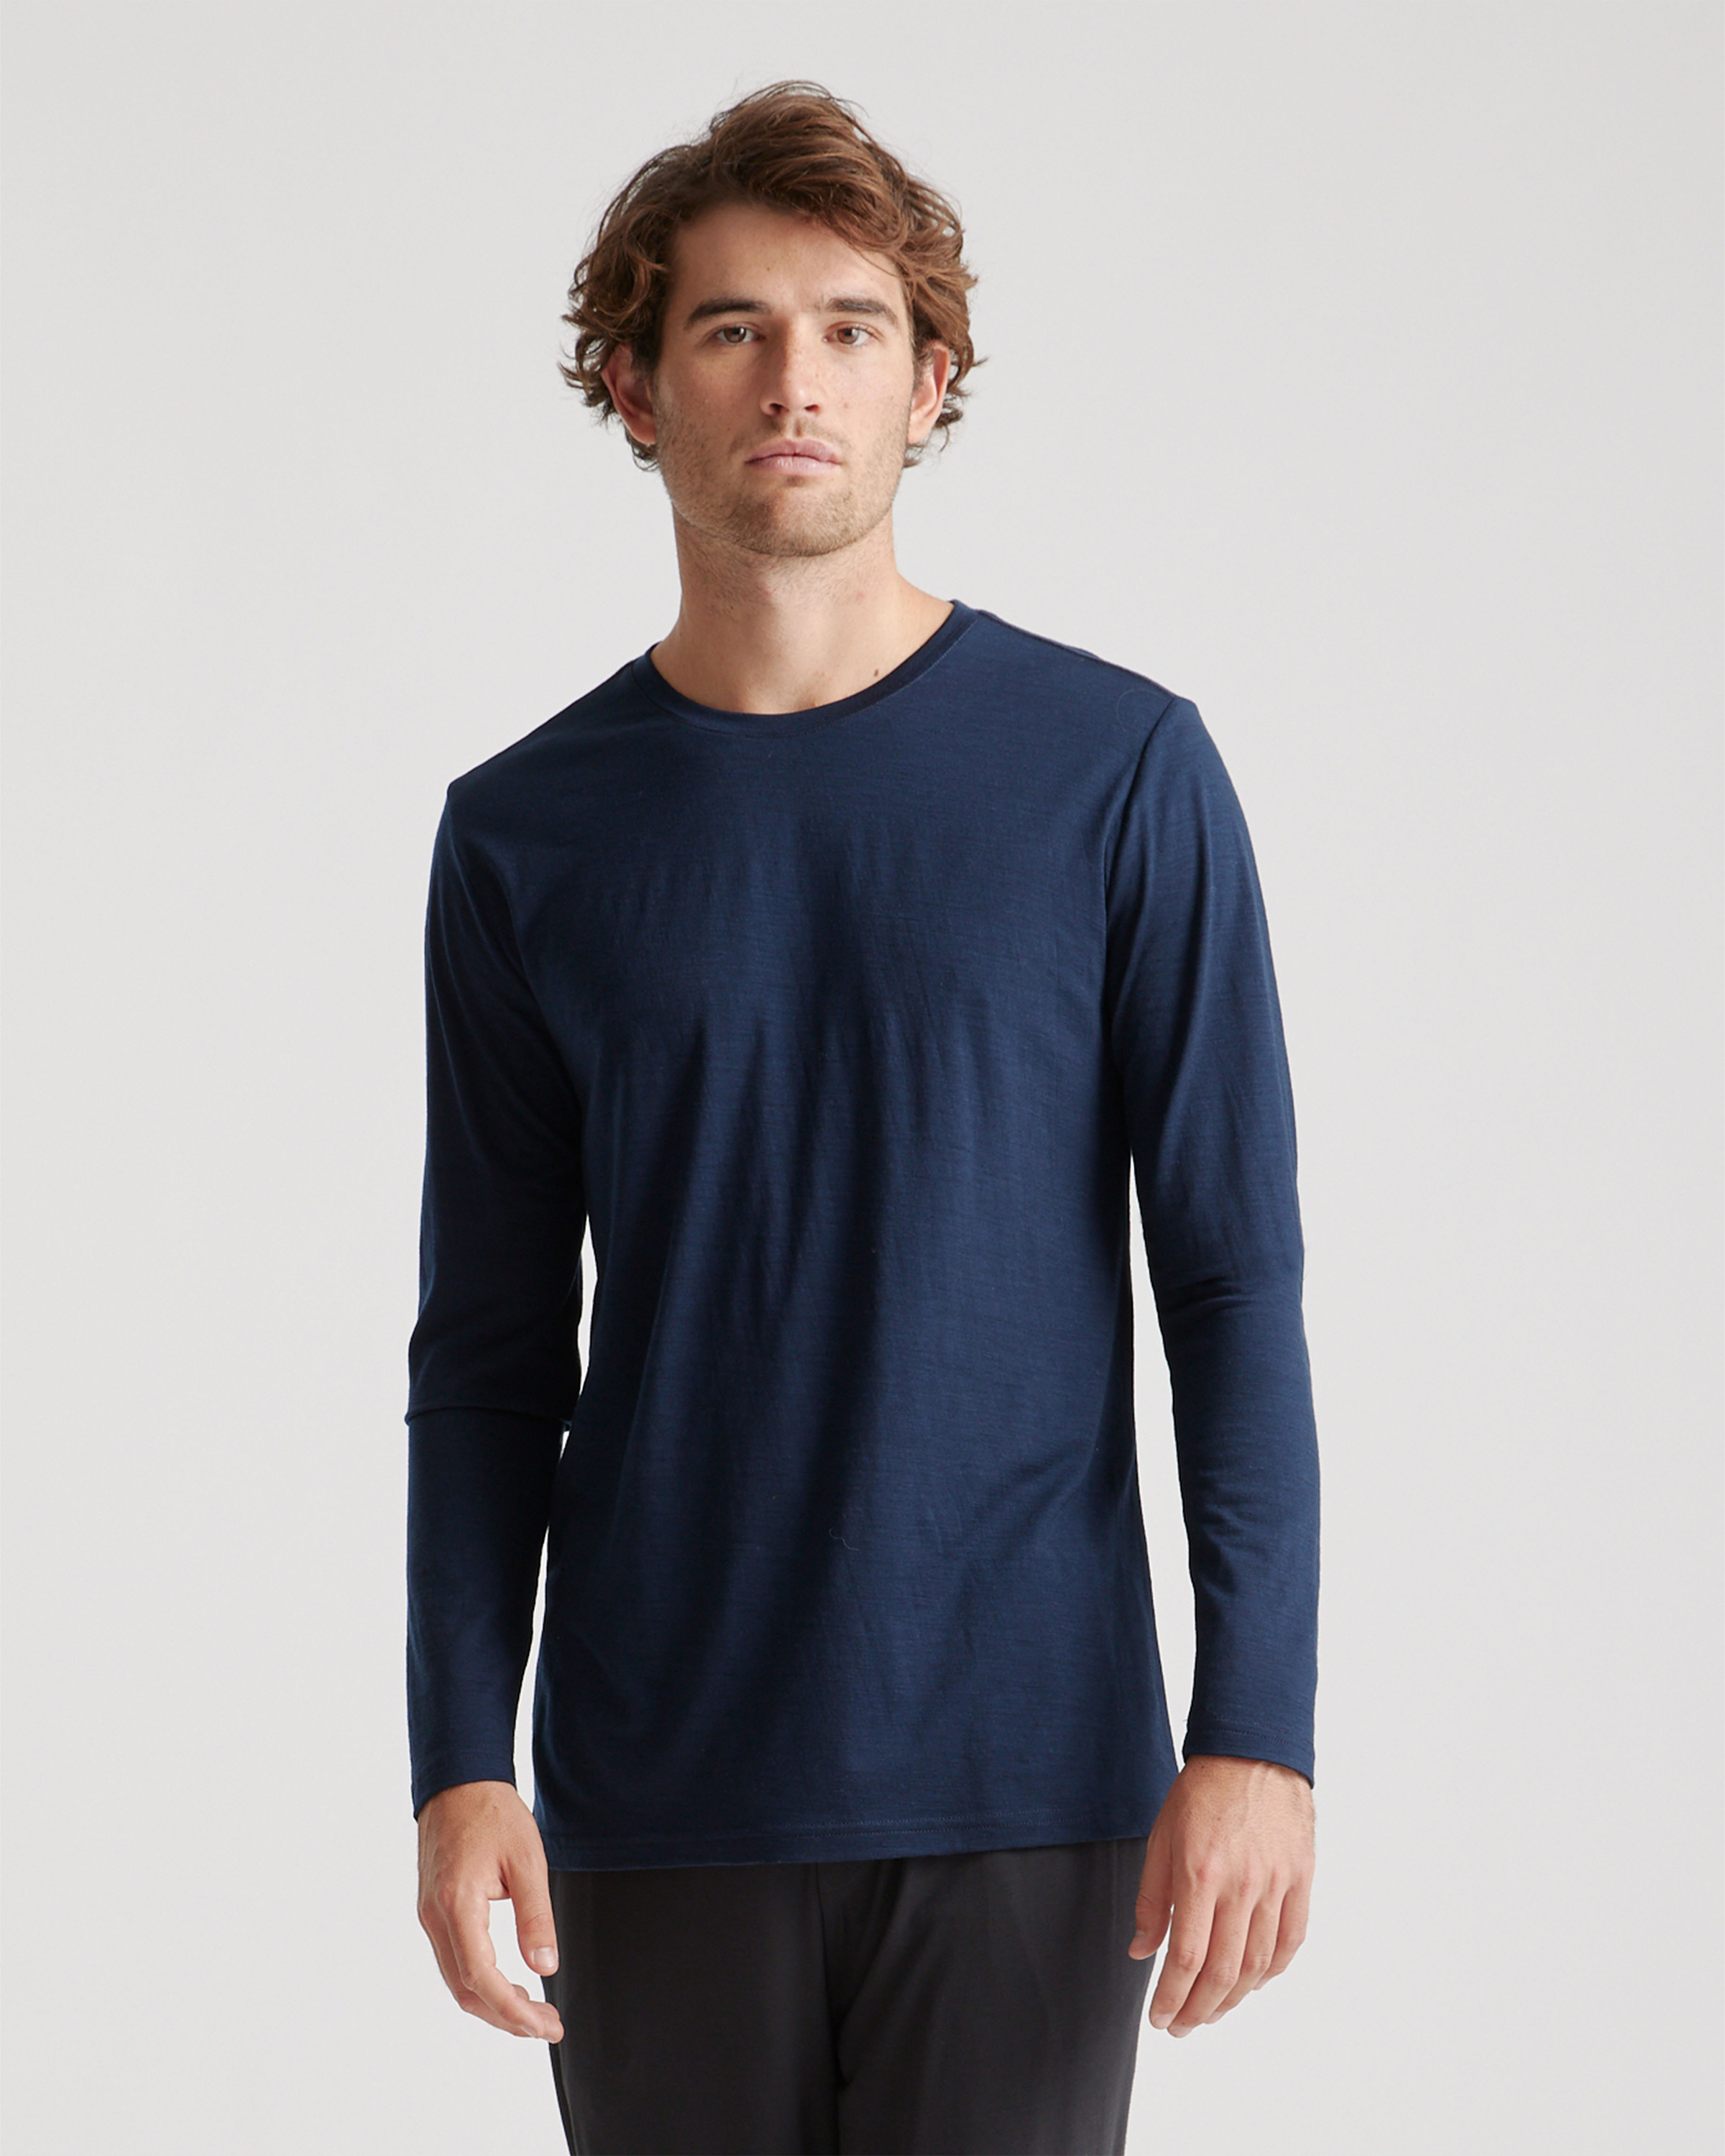 Merino Wool Union Thermal Underwear 250G Base Layer Crew Shirt With Long  Sleeves, Breathable Baselayer, USA Size L231011 From Bingcoholnciaga,  $16.83